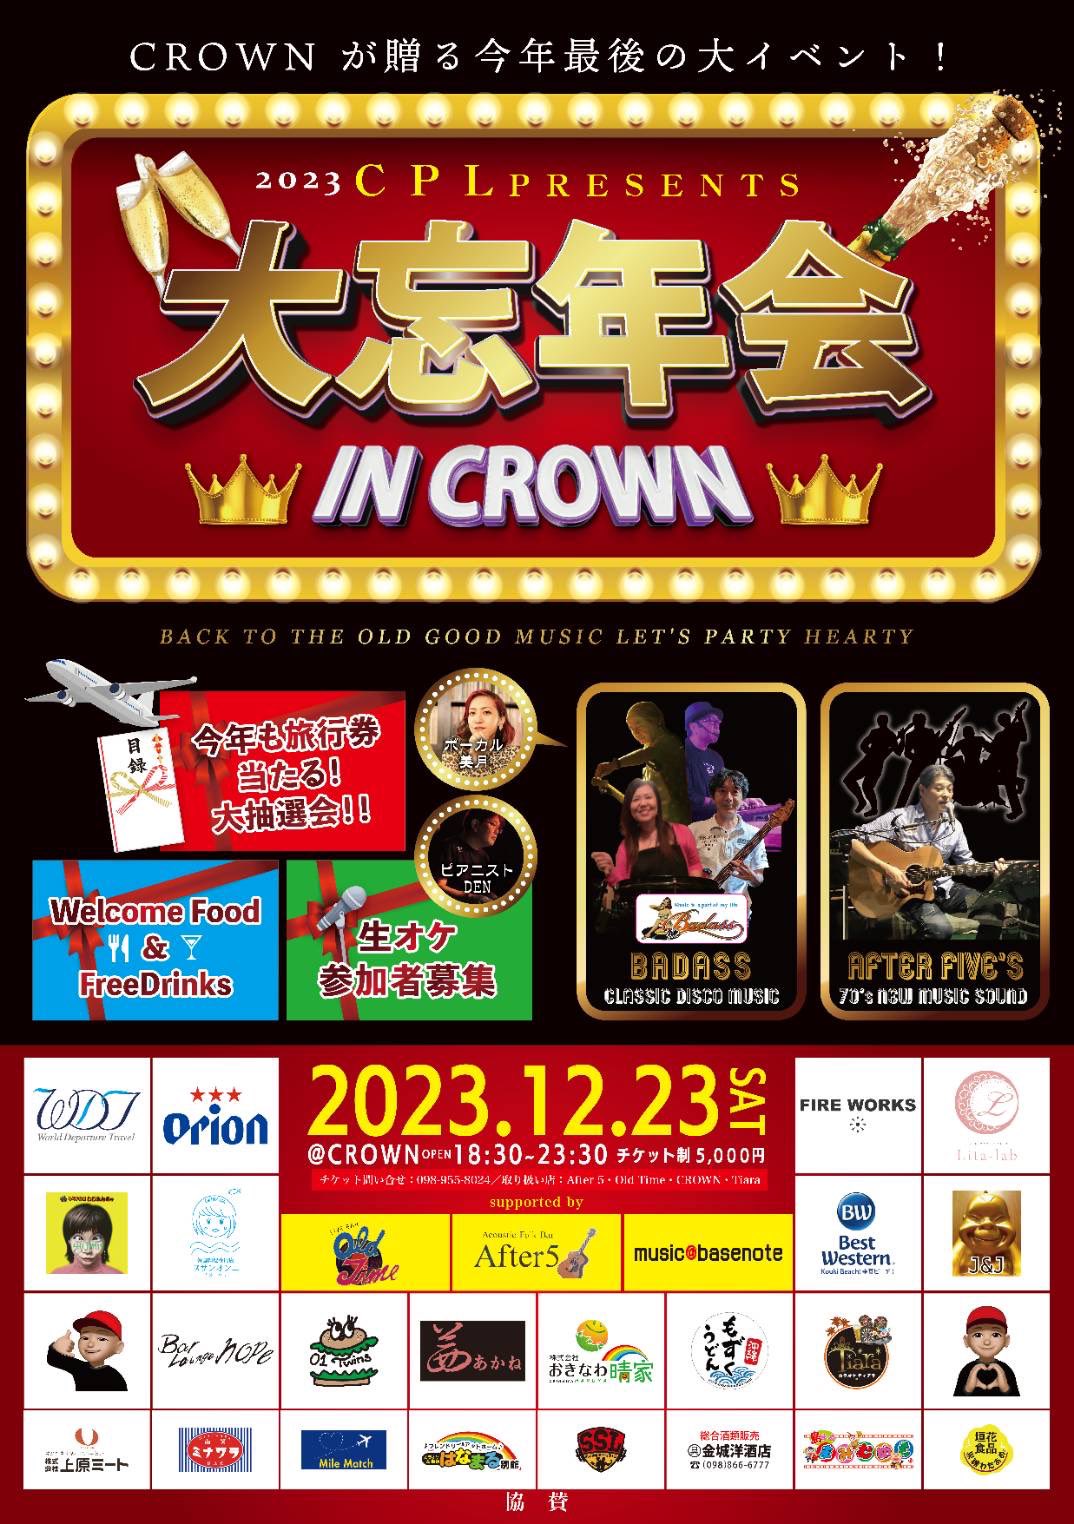 『CROWN』さんの大忘年会、出席し〼🍻✨page-visual 『CROWN』さんの大忘年会、出席し〼🍻✨ビジュアル